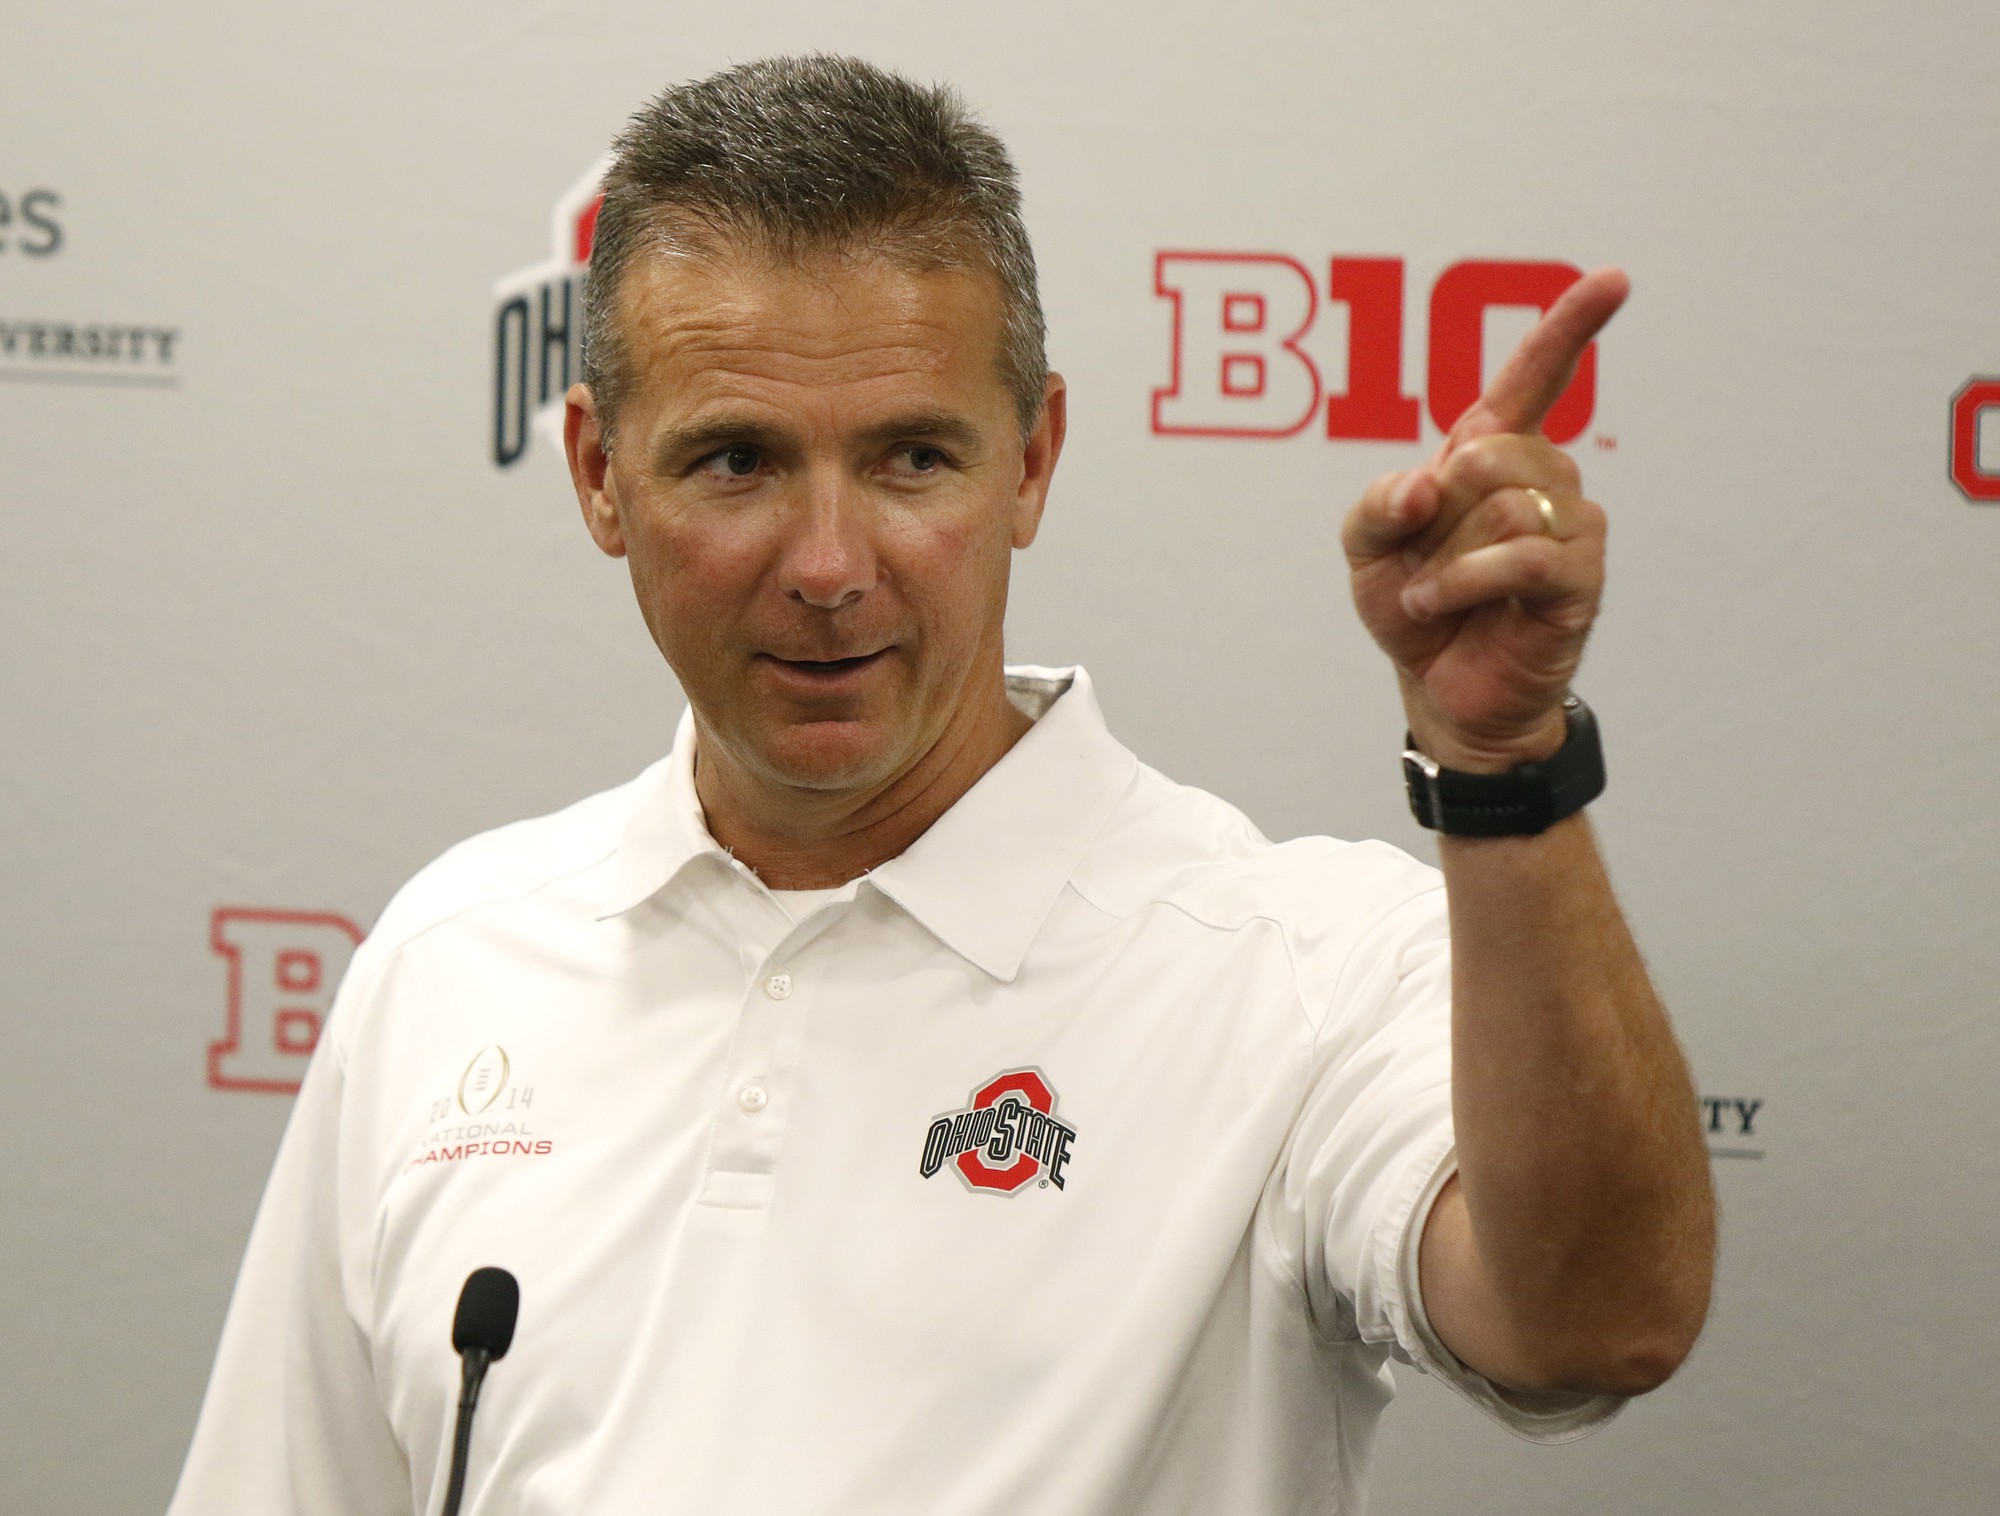 Ohio State coach Urban Meyer speaks to reporters during the university's NCAA college football media day in Columbus, Ohio. Ohio State is the first unanimous preseason No. 1 in The Associated Press college football poll.